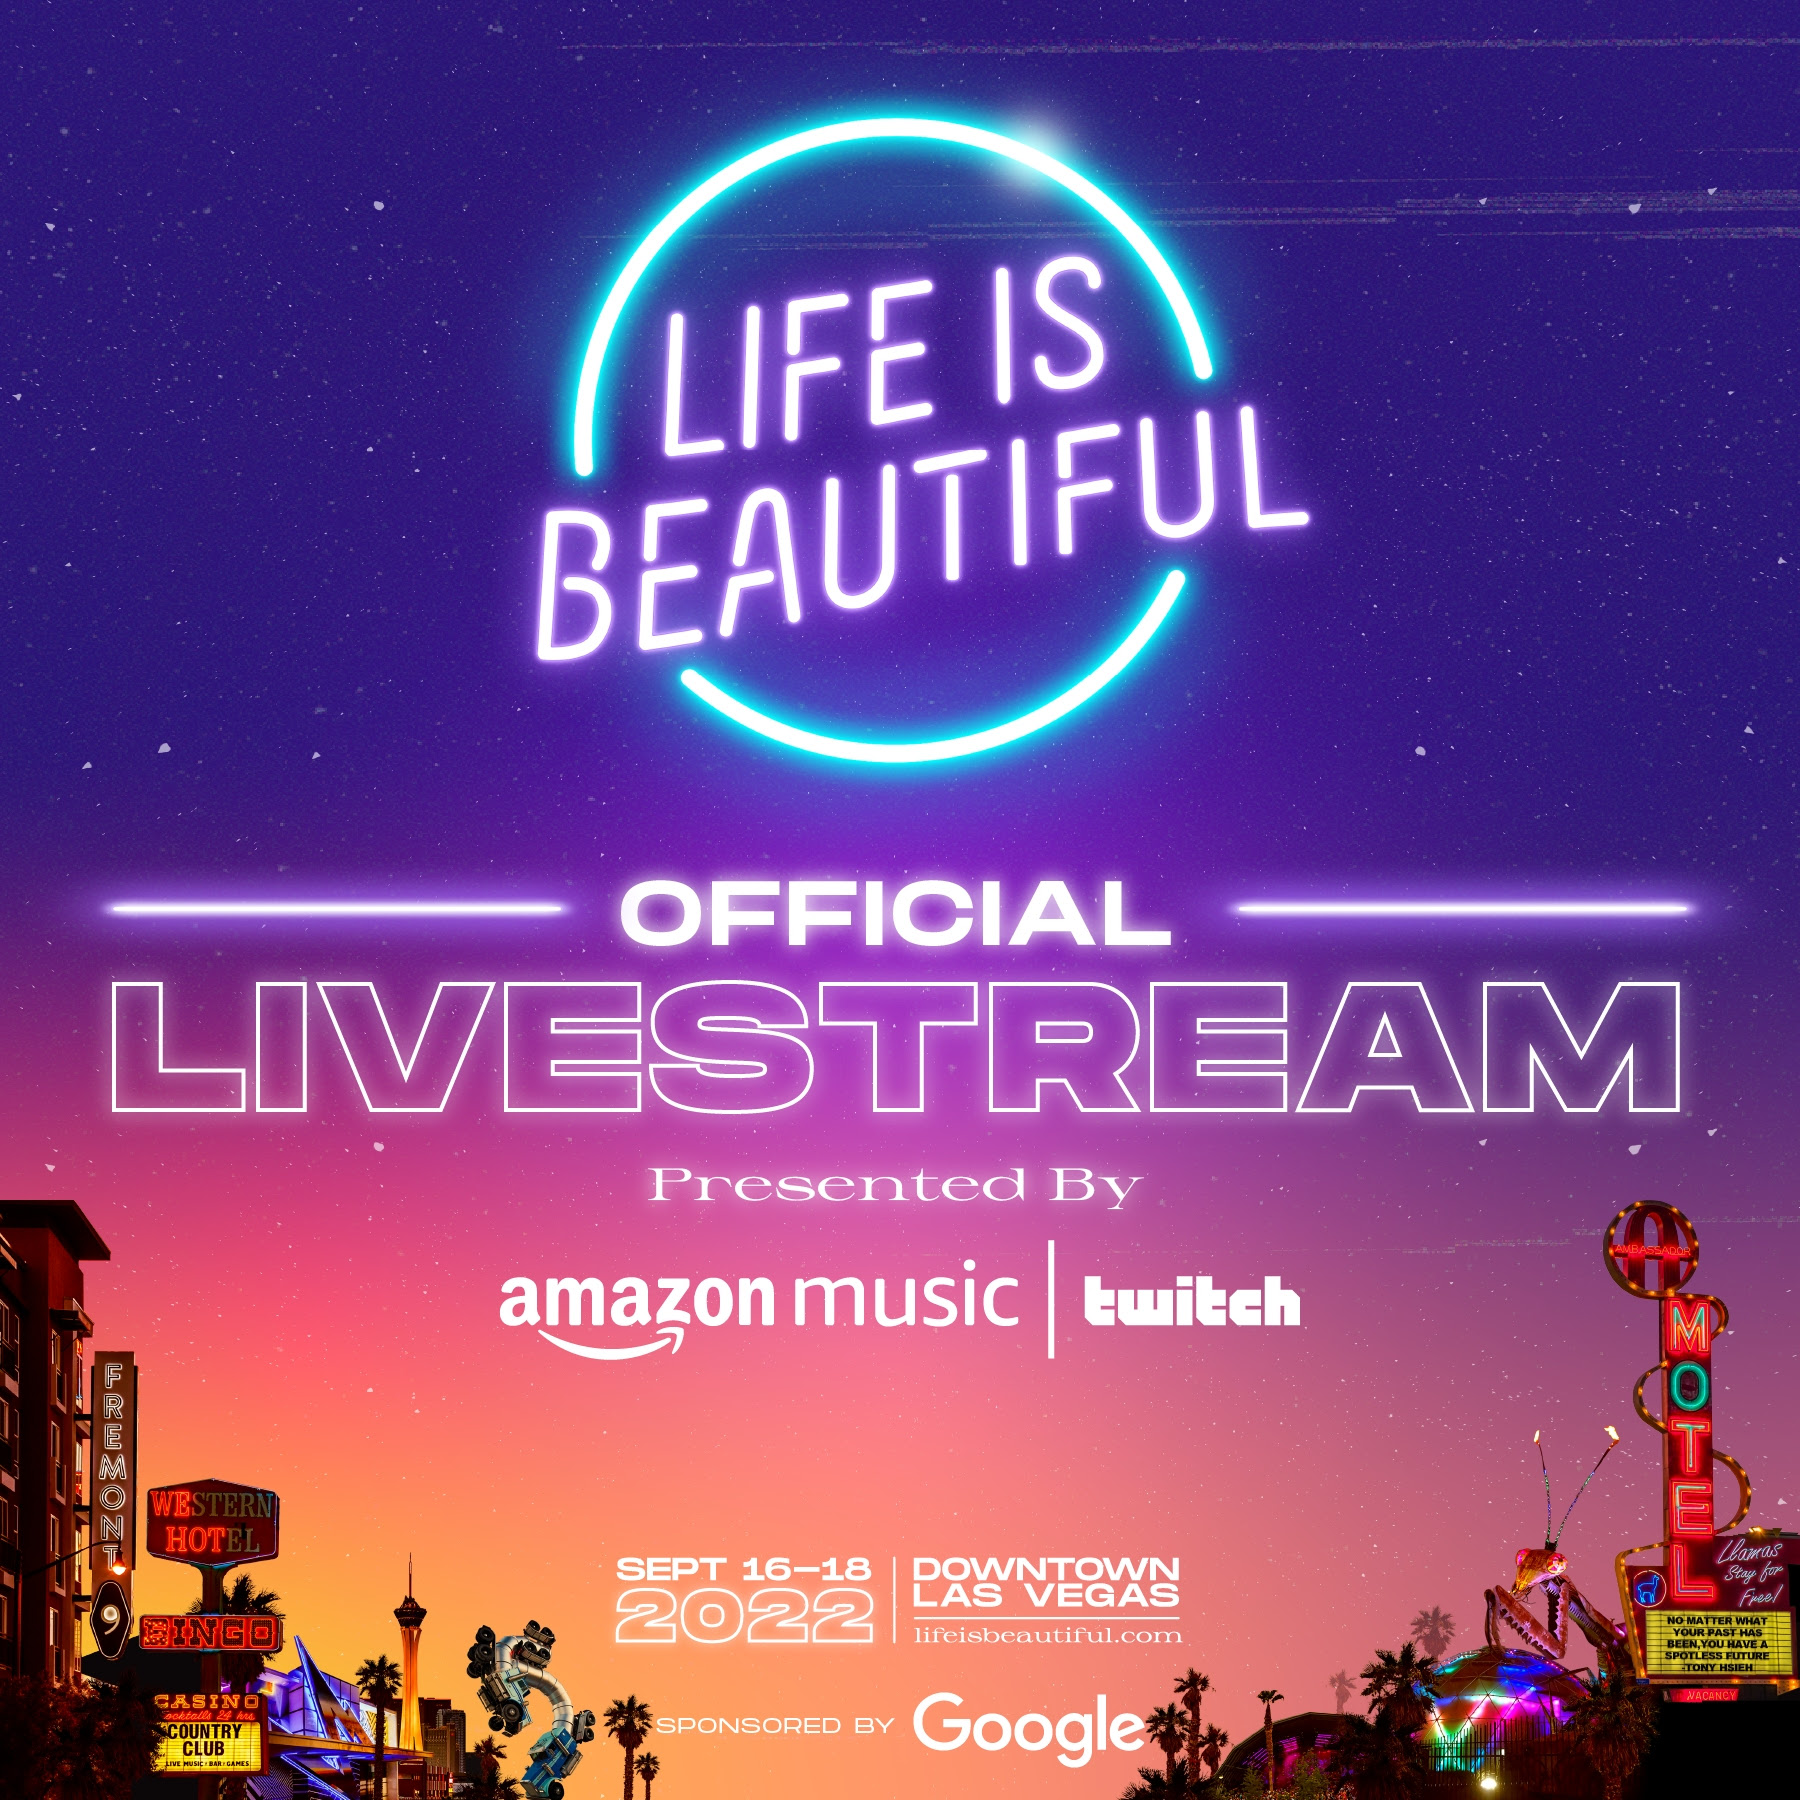 Life is Beautiful Official Livestream Presented by Amazon Music | Twitch